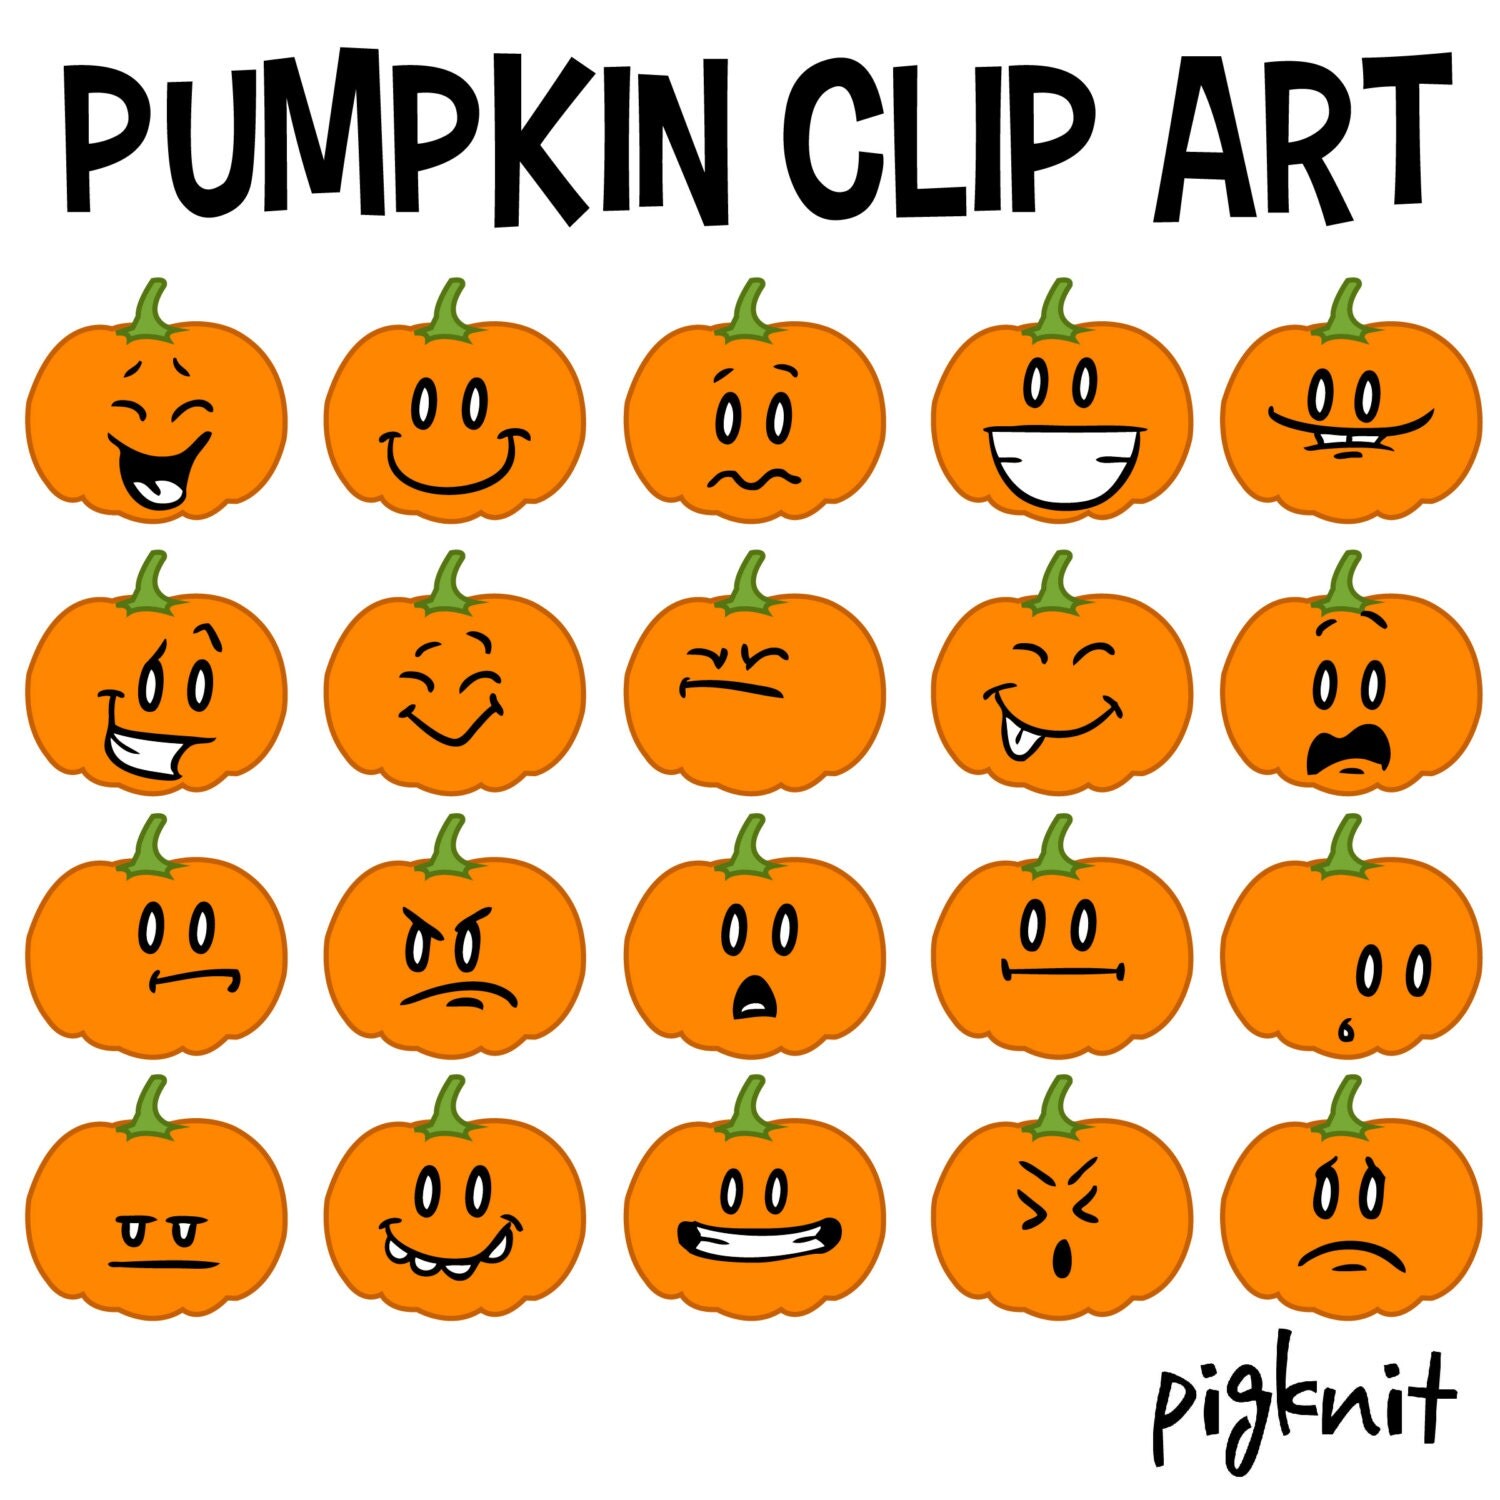 clipart of funny pumpkin faces - photo #9